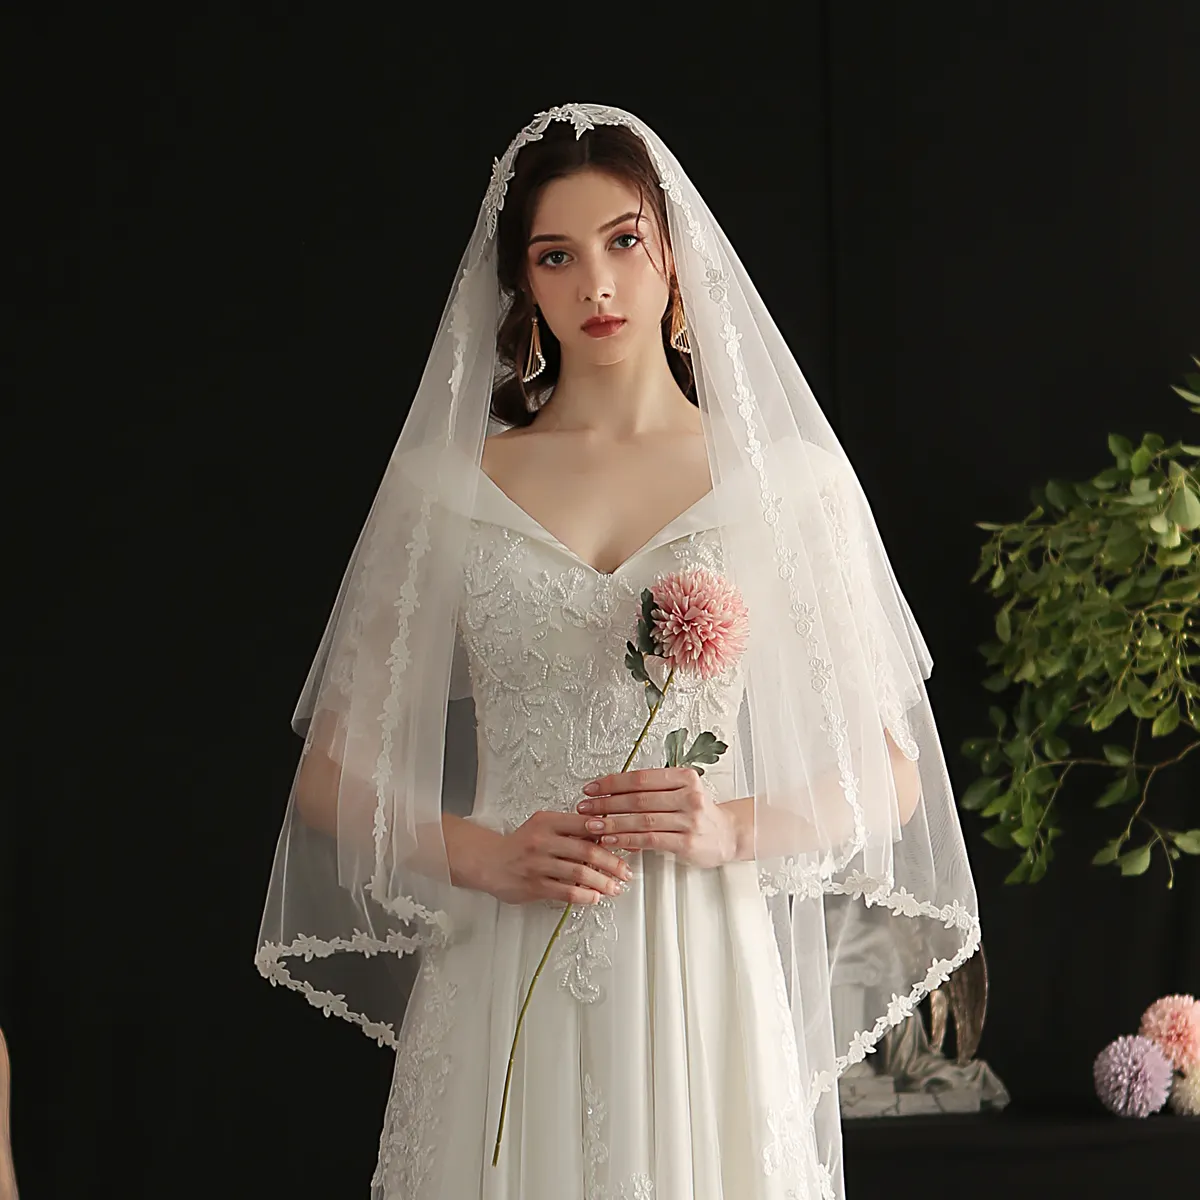 V654 Luxurious Wedding Bridal Chapel Veil One-Layer Soft Tulle Lace Appliqued Long White Brides Veil Women Marriage Accessories